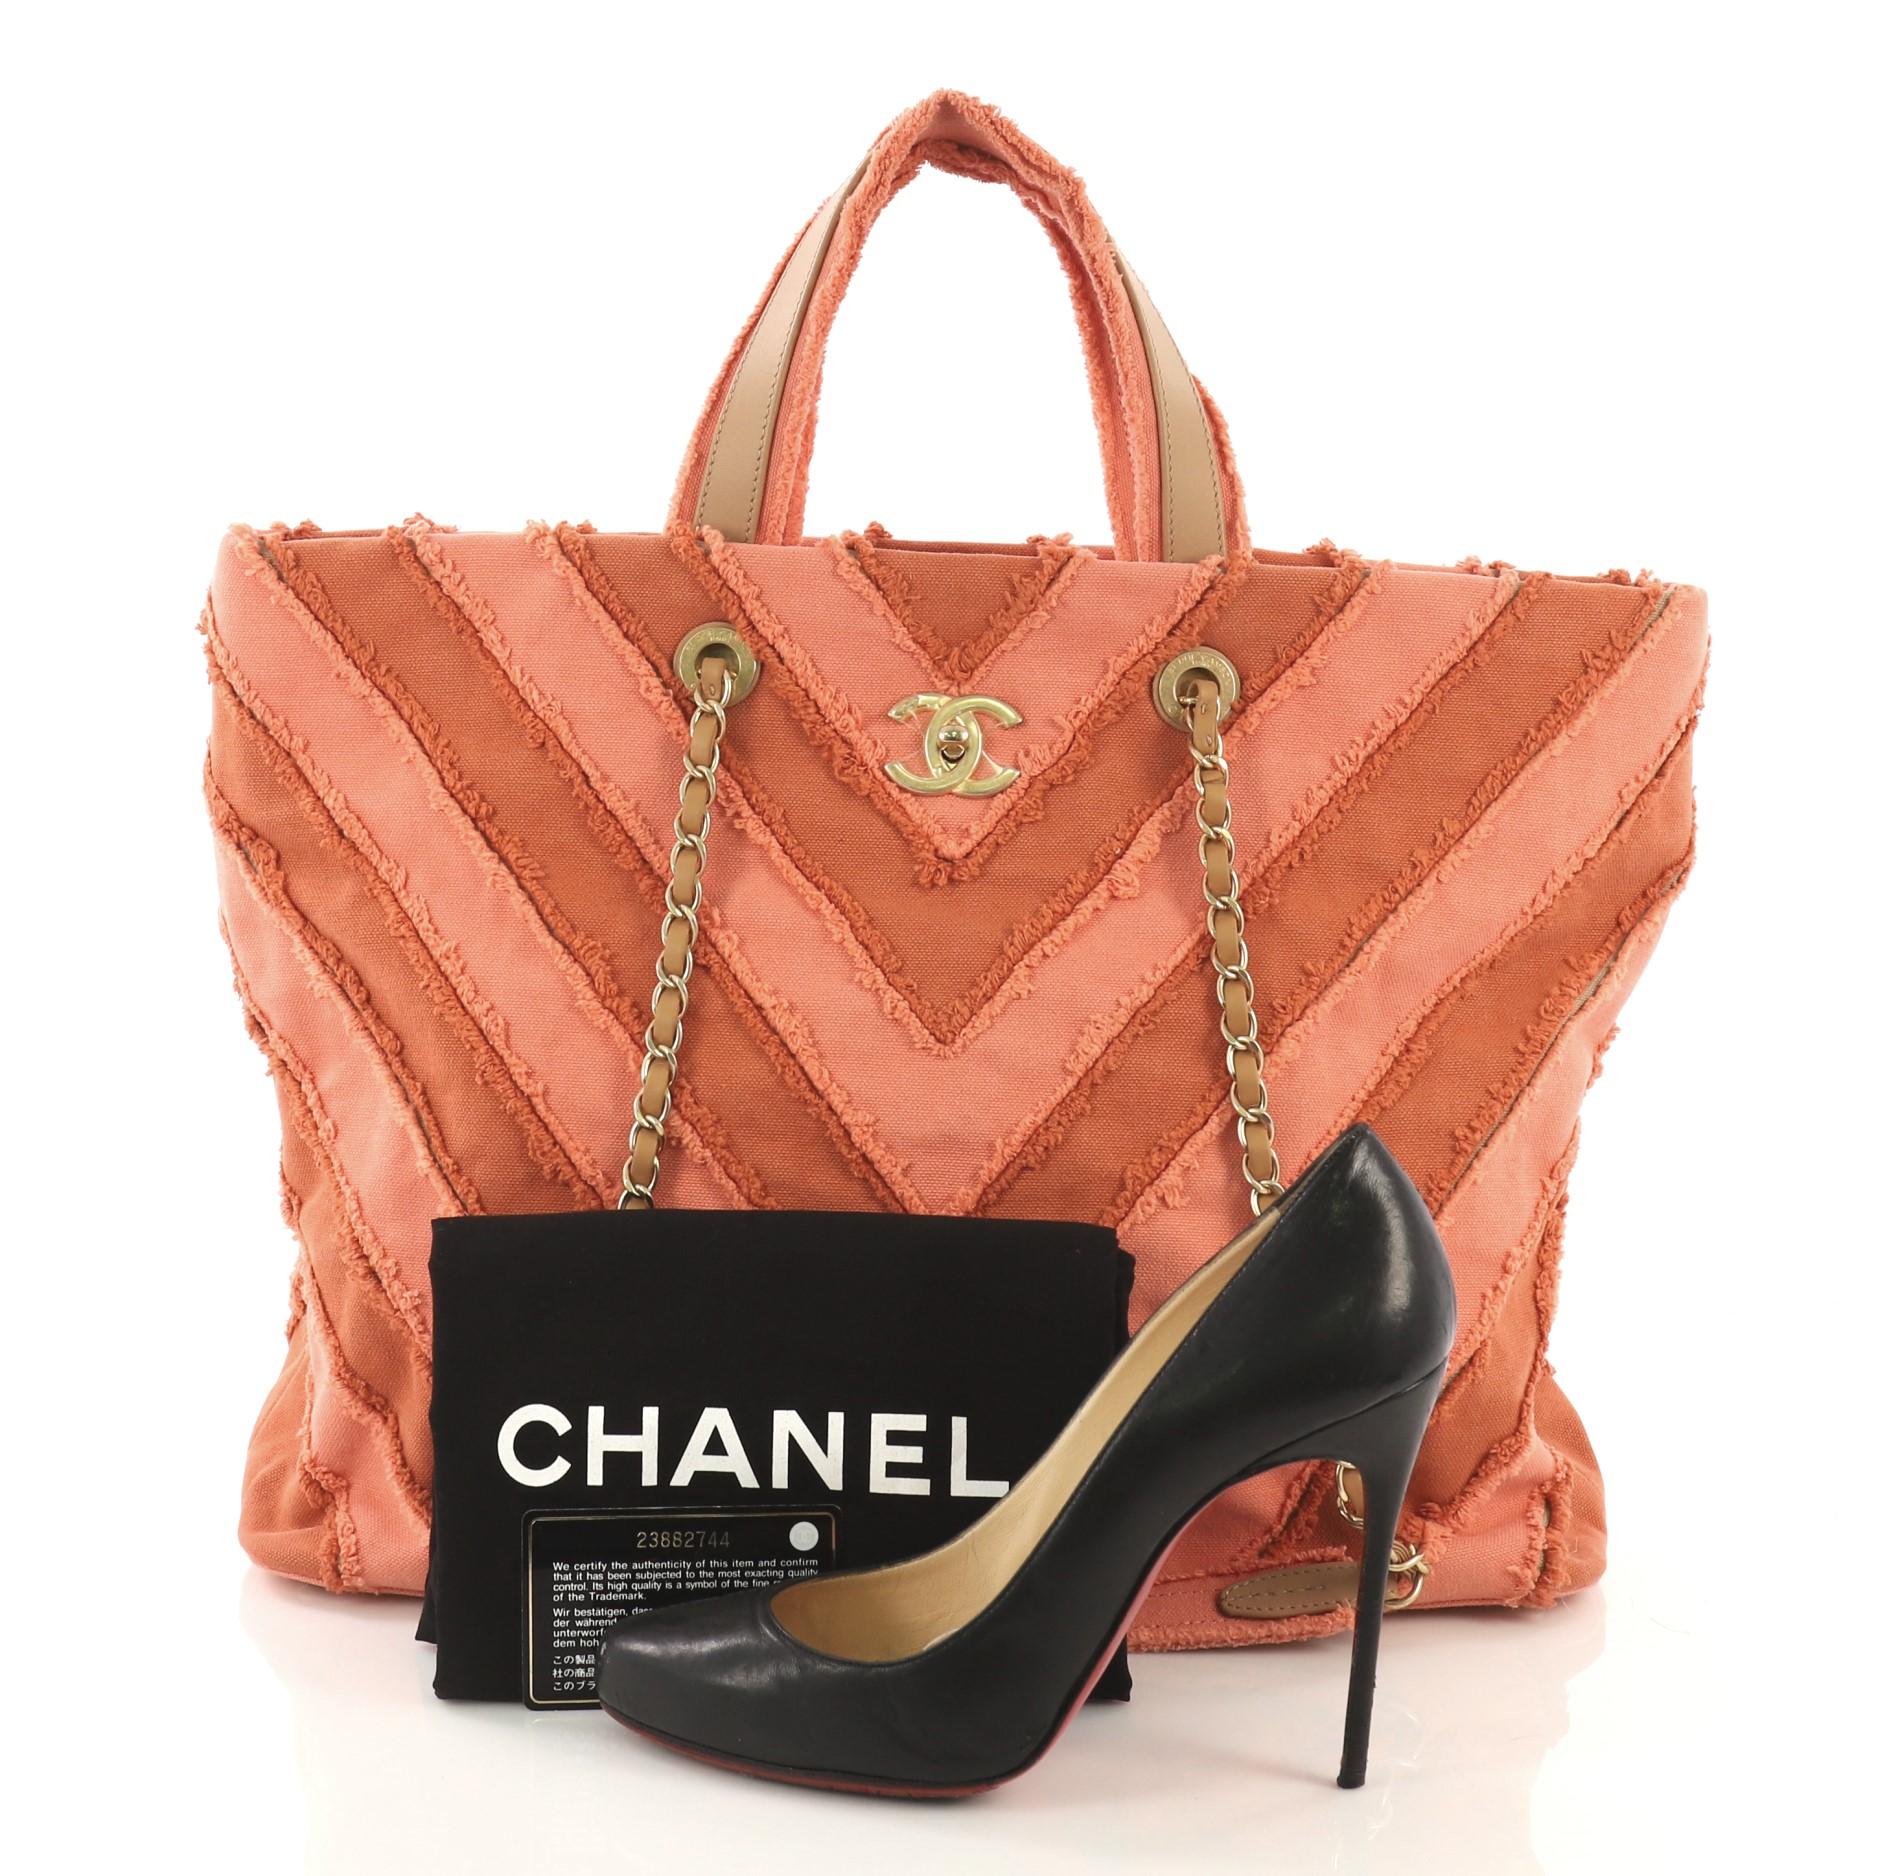 This Chanel Shopping Tote Chevron Canvas Patchwork Large, crafted from pink chevron canvas patchwork, features dual top handles, woven-in leather chain straps with shoulder pads, protective base studs and matte gold-tone hardware. Its CC turn-lock